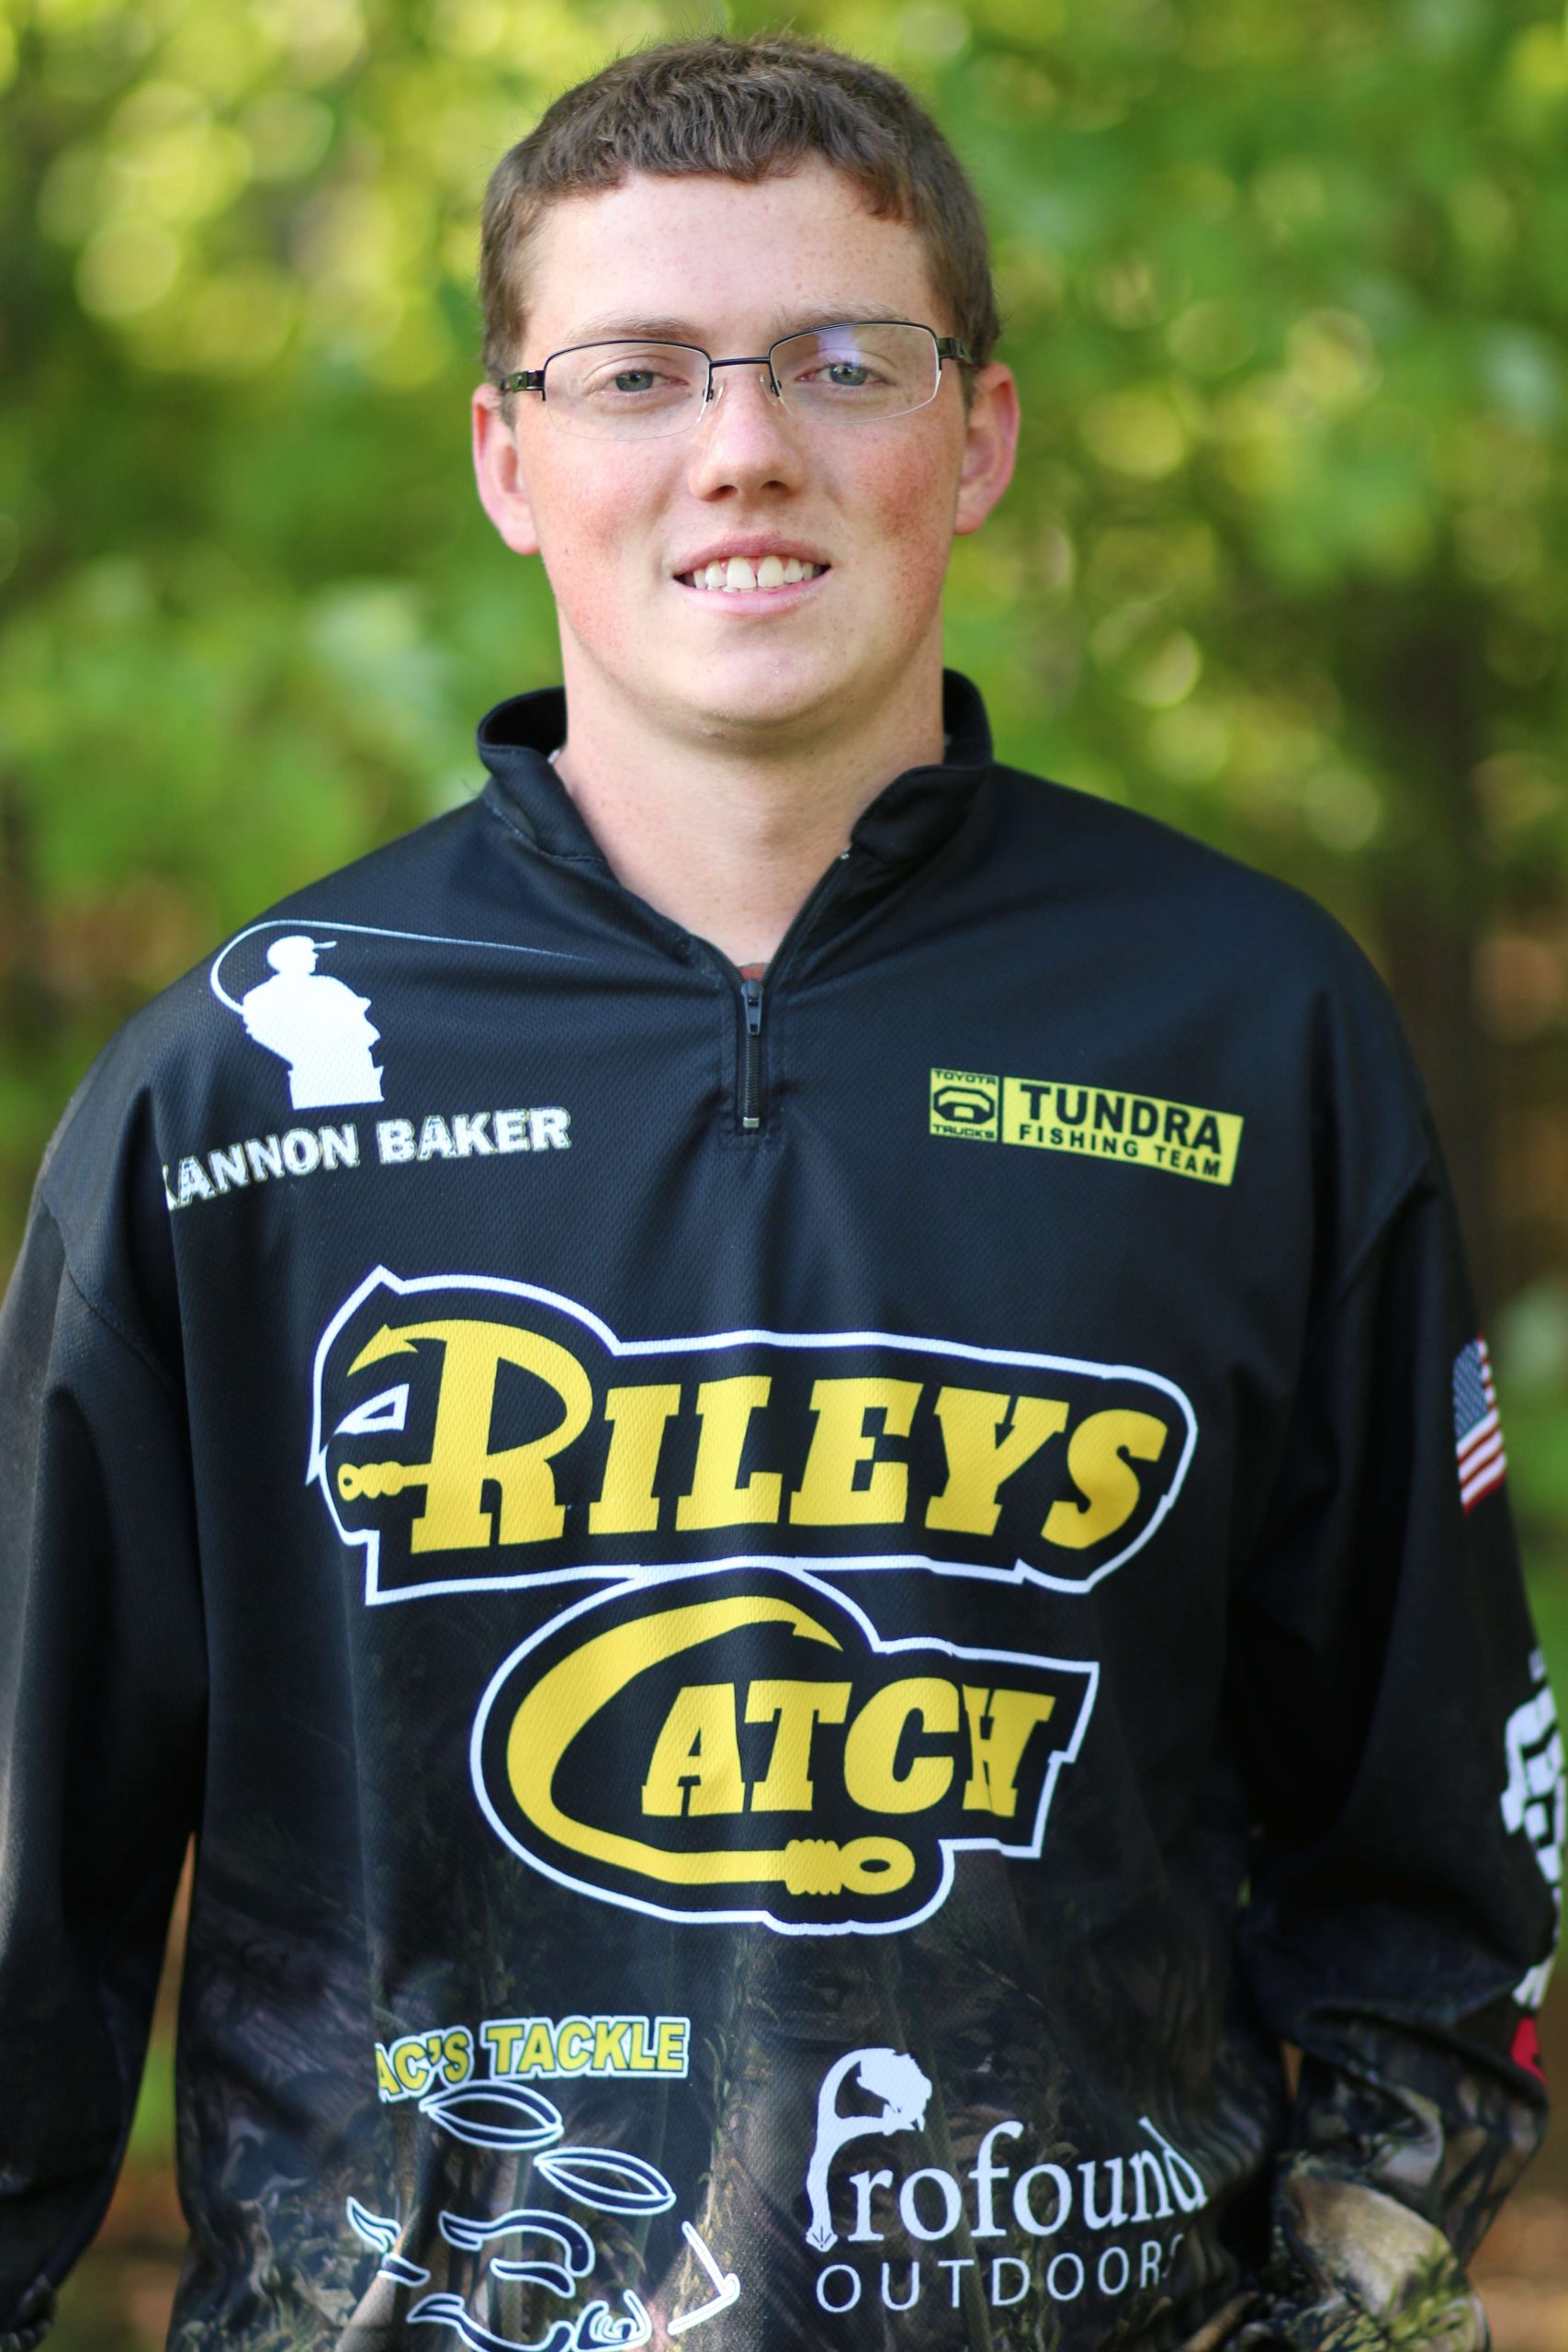 <p>North Carolina: Kannon Baker</p>
<p>
Baker is a senior at the Central Academy of Technology and Arts. He took third place in the North Carolina B.A.S.S. Nation High School State Championship and is a member of the Riley's Catch of Life Impact Leadership Team.